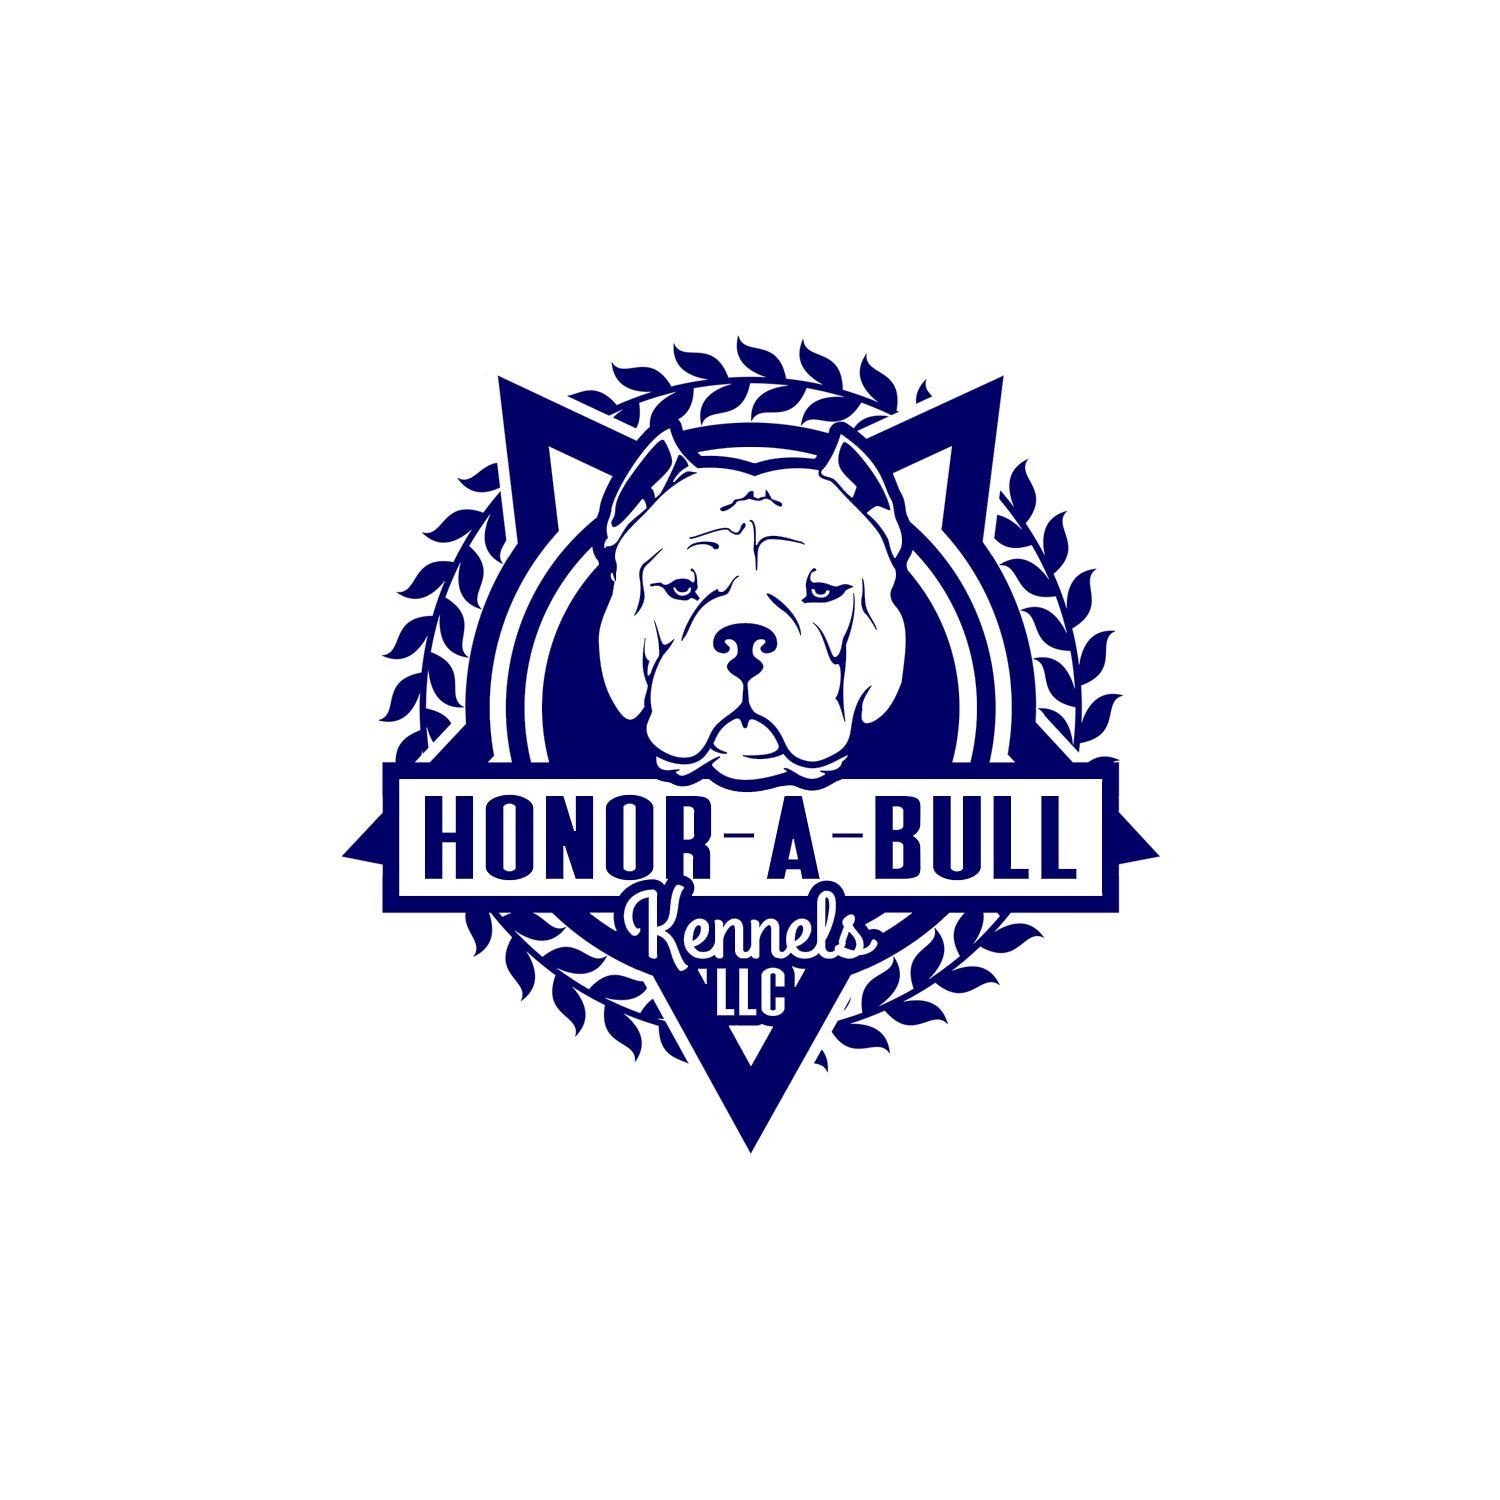 United States Business Logo - Bold, Serious, Business Logo Design for Honor-A-Bull Kennels LLC. by ...